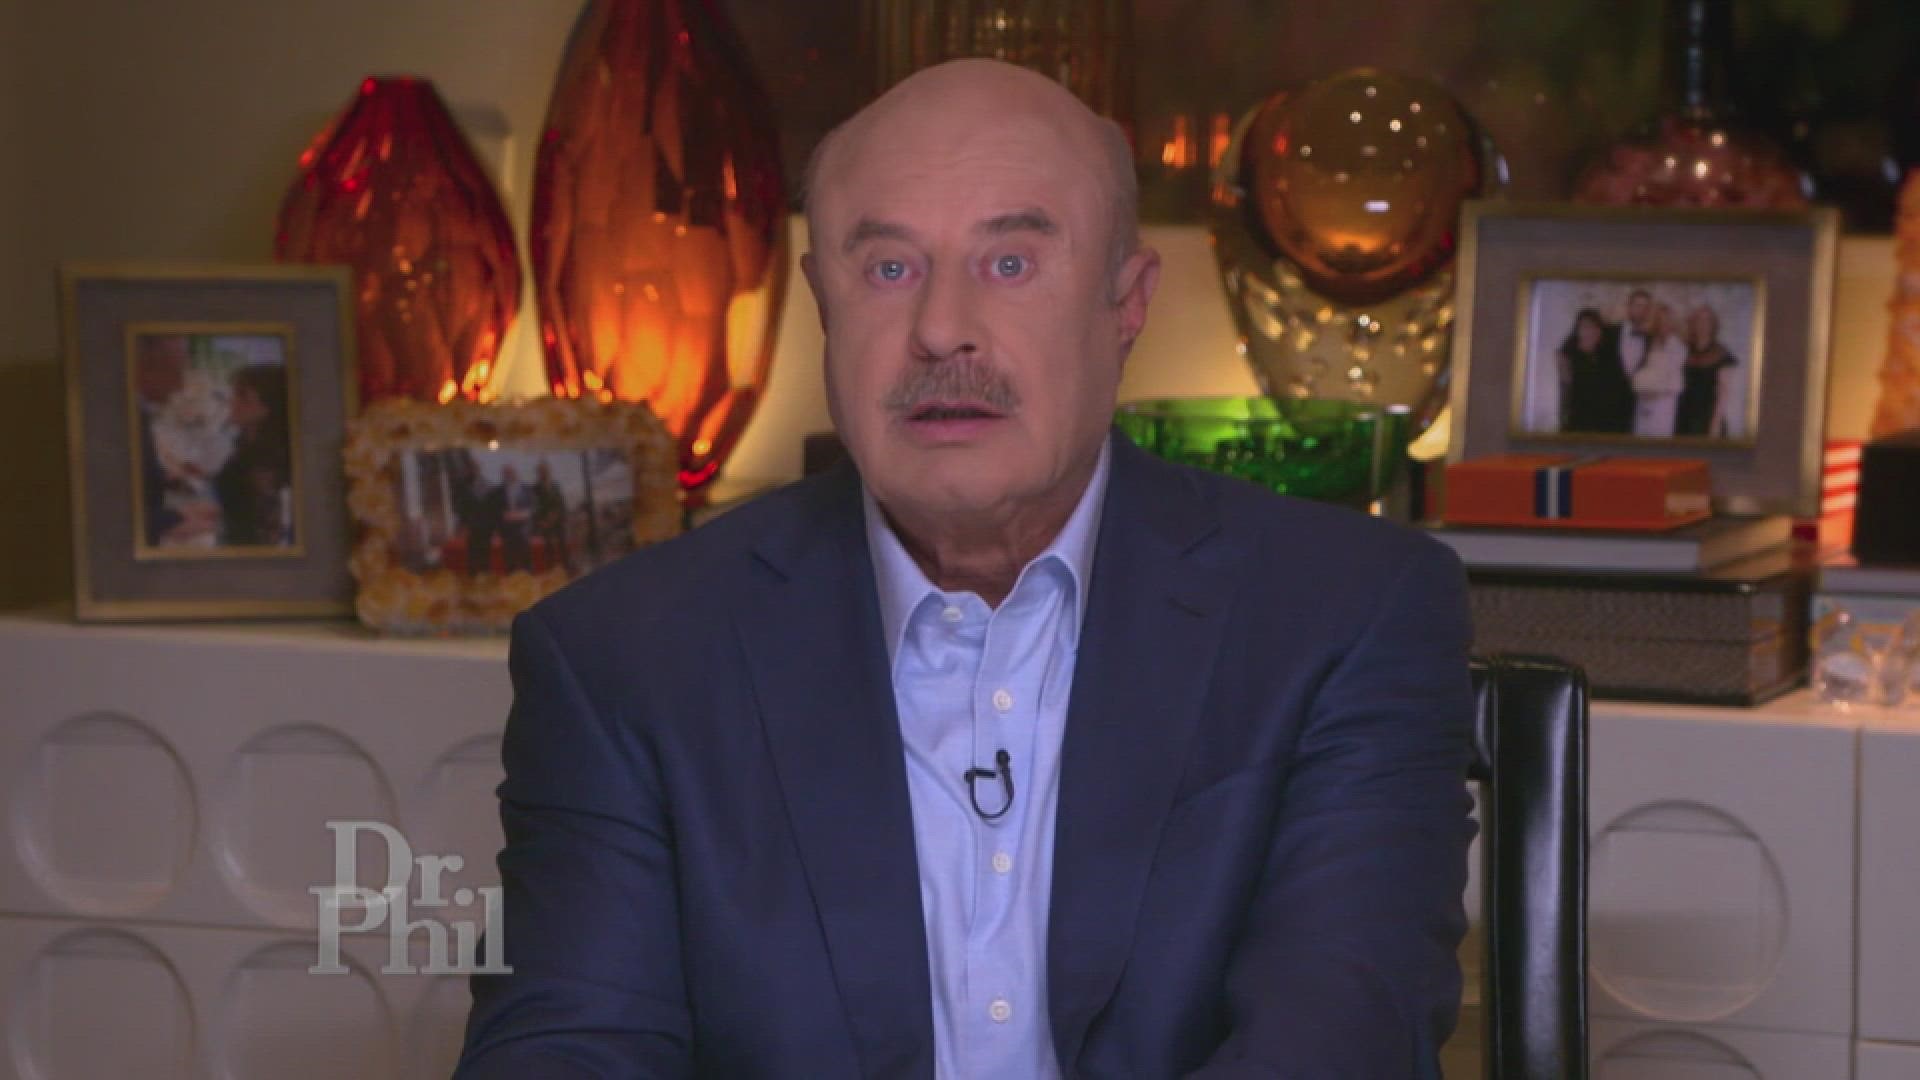 Joe Petito spoke with Dr. Phil in a pre-recorded show prior to the latest findings in the search for Gabby Petito.